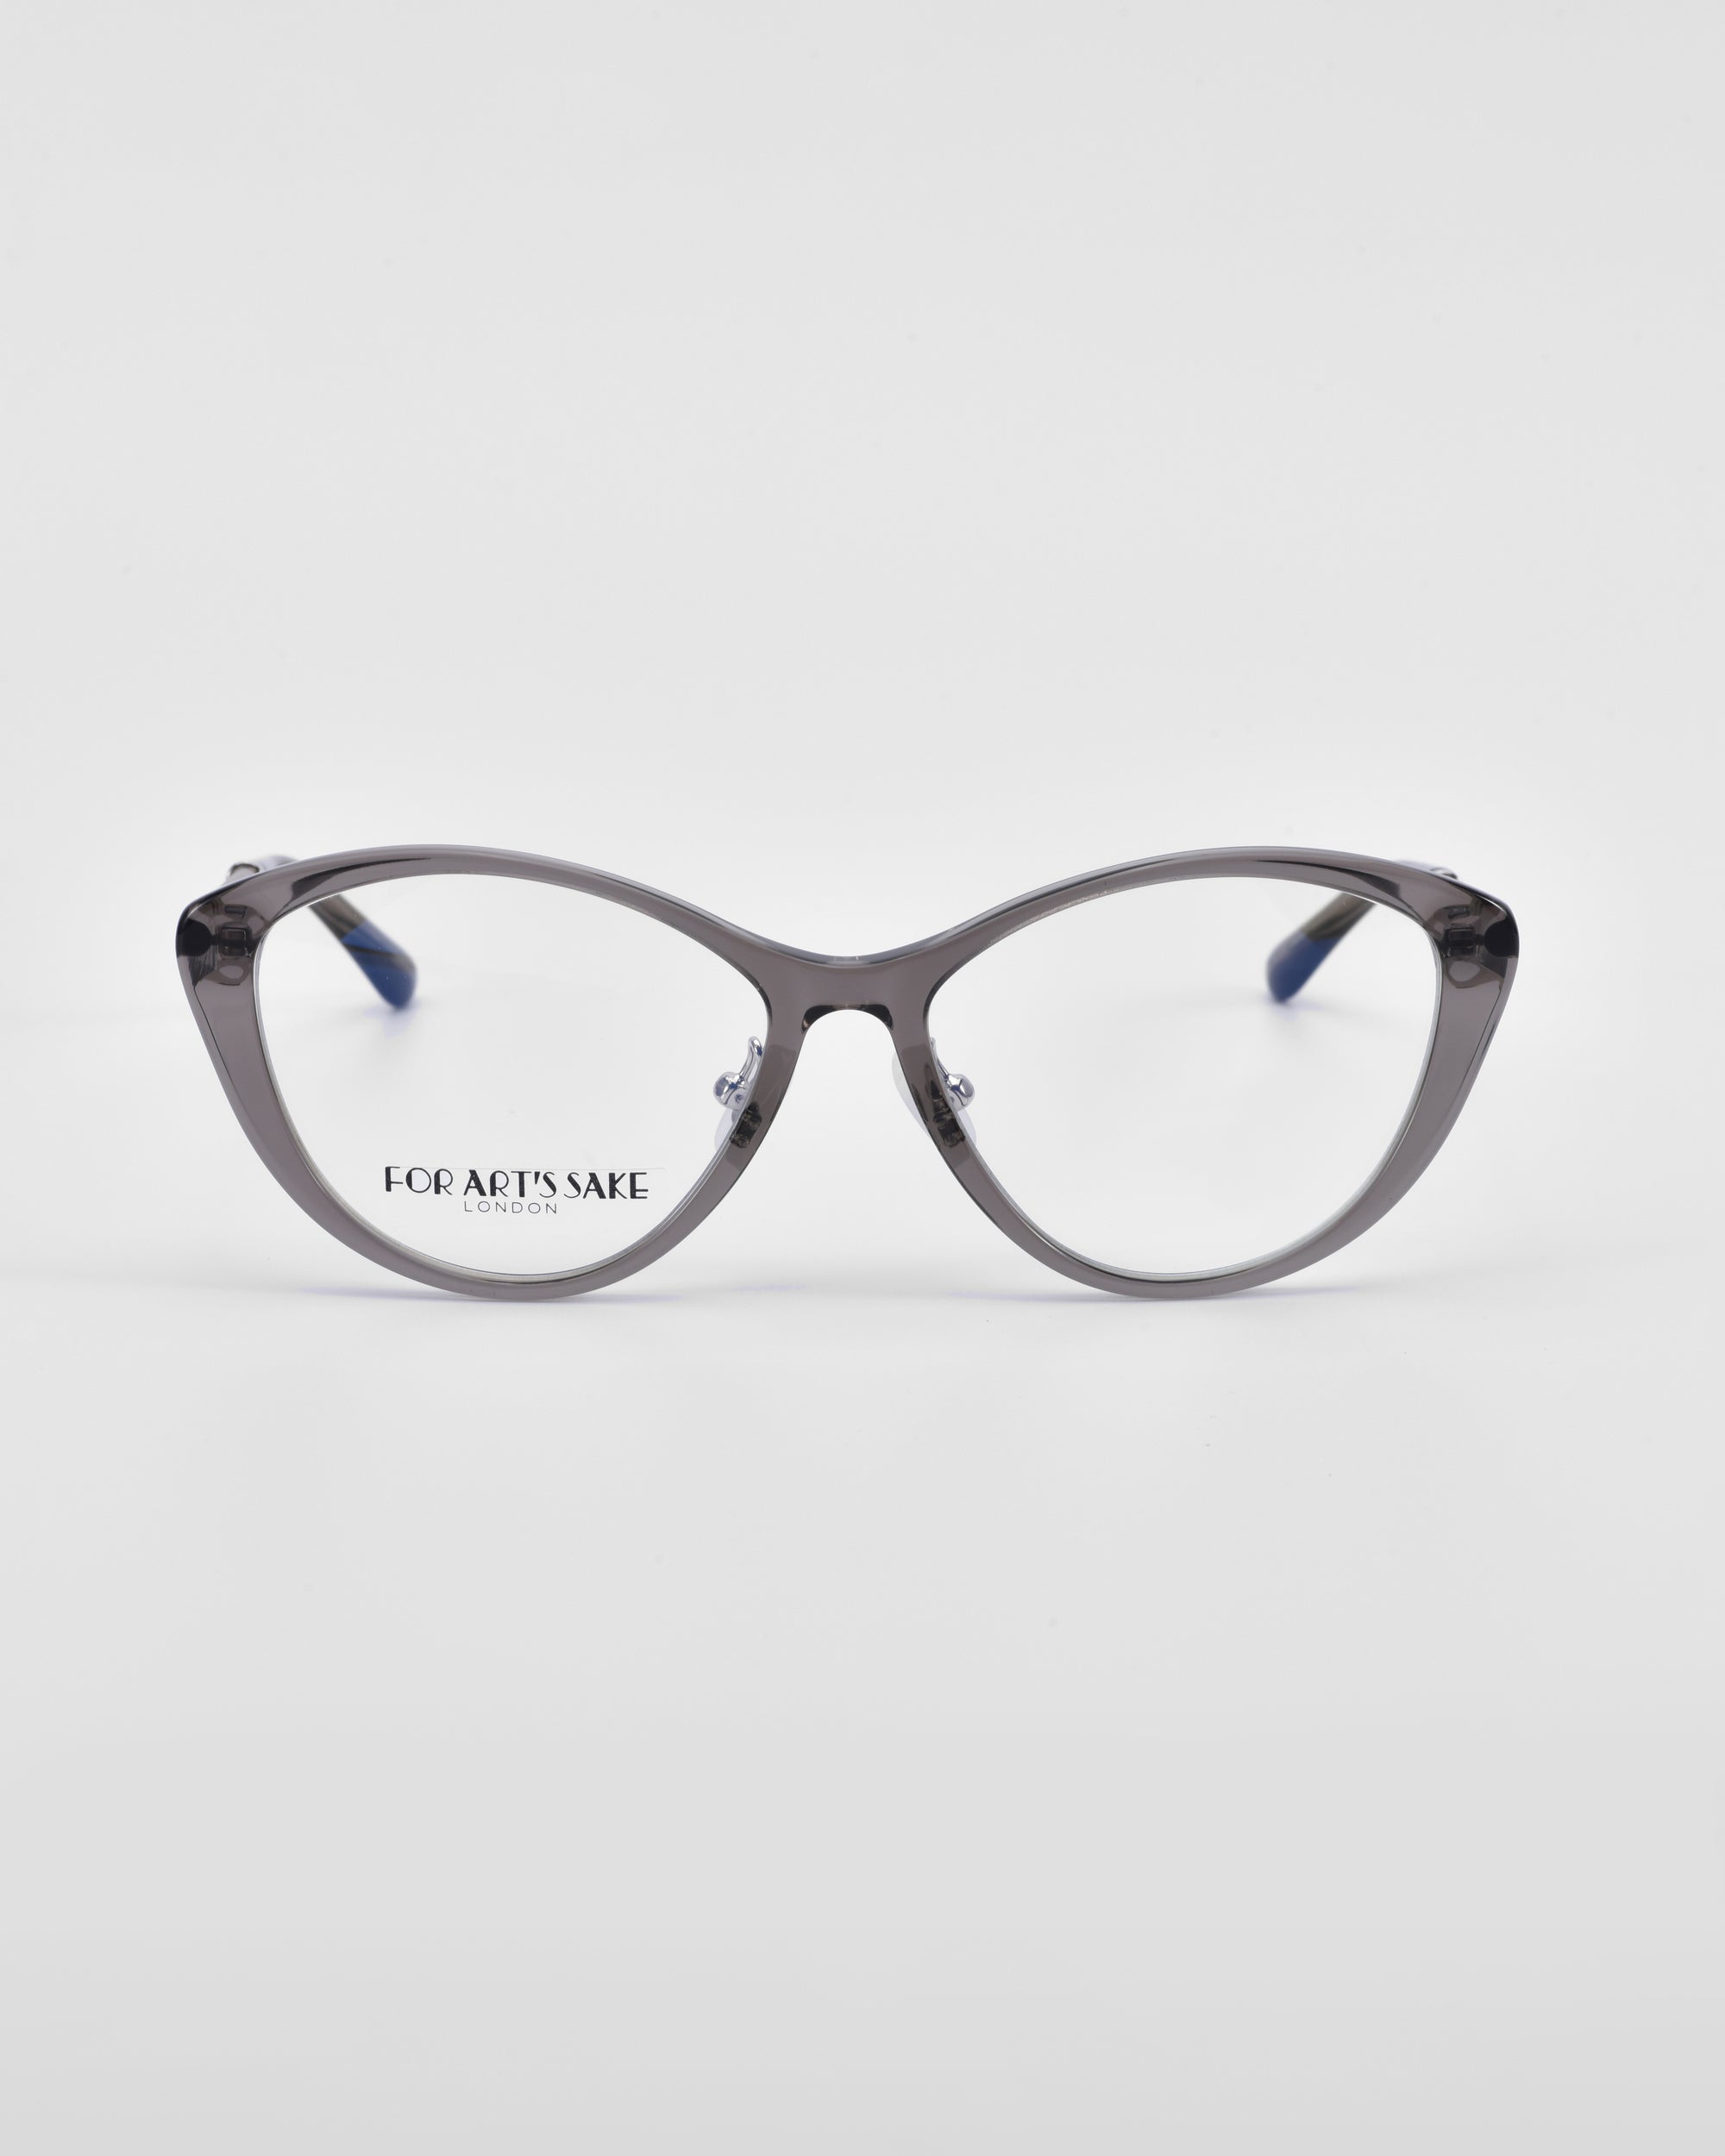 A pair of gray-framed eyeglasses with a cat-eye design, featuring 18-karat gold plating and the brand "For Art's Sake®" inscribed on one lens, is centered against a plain white background. The model is called Perla II.